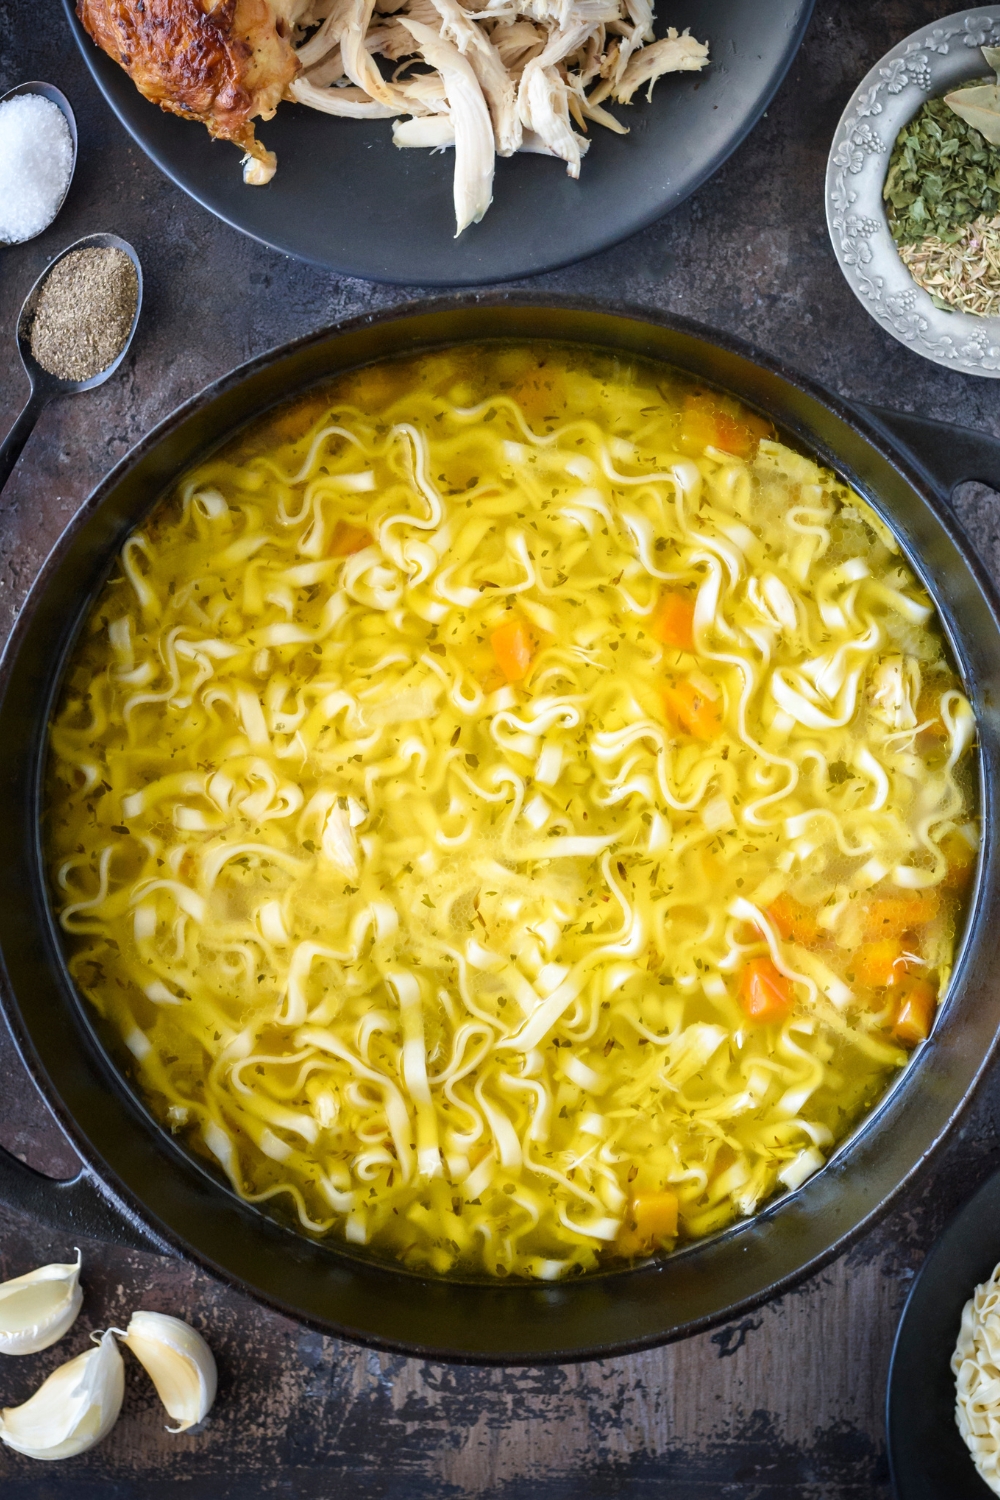 A large pot of soup with noodles and chunks of carrot floating in it.